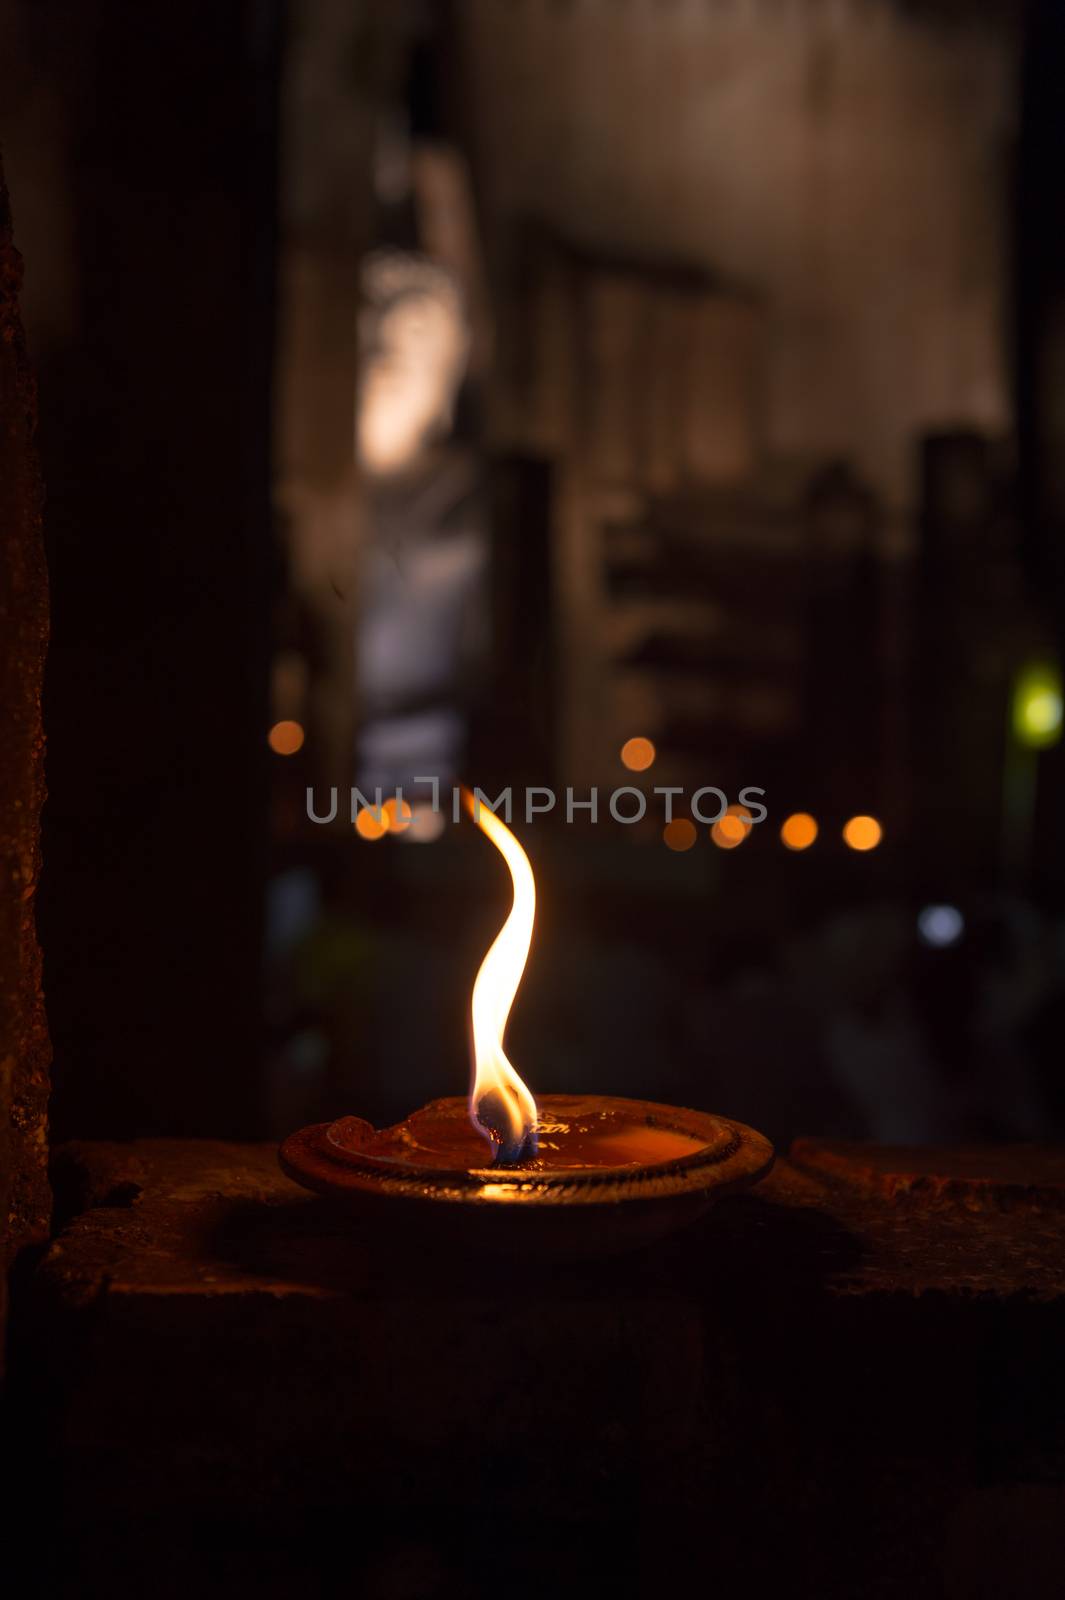 Closeup of candle in the temple